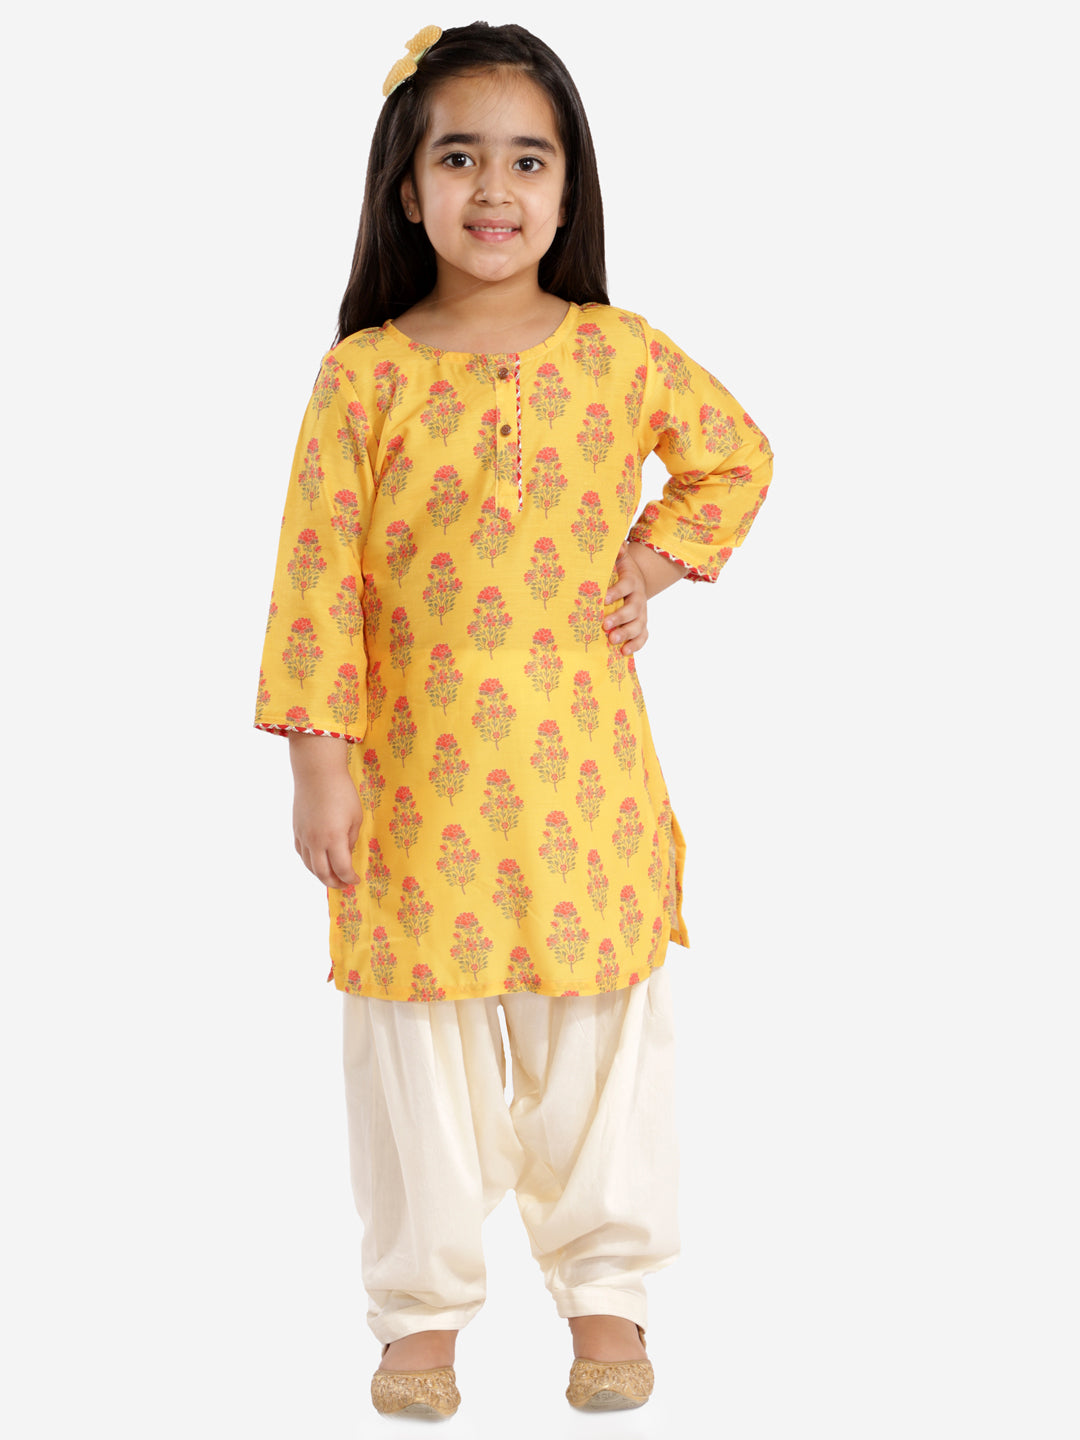 fcity.in - Clearance Mela Specialgirly Kids Patiala Premium Quality Viscouse